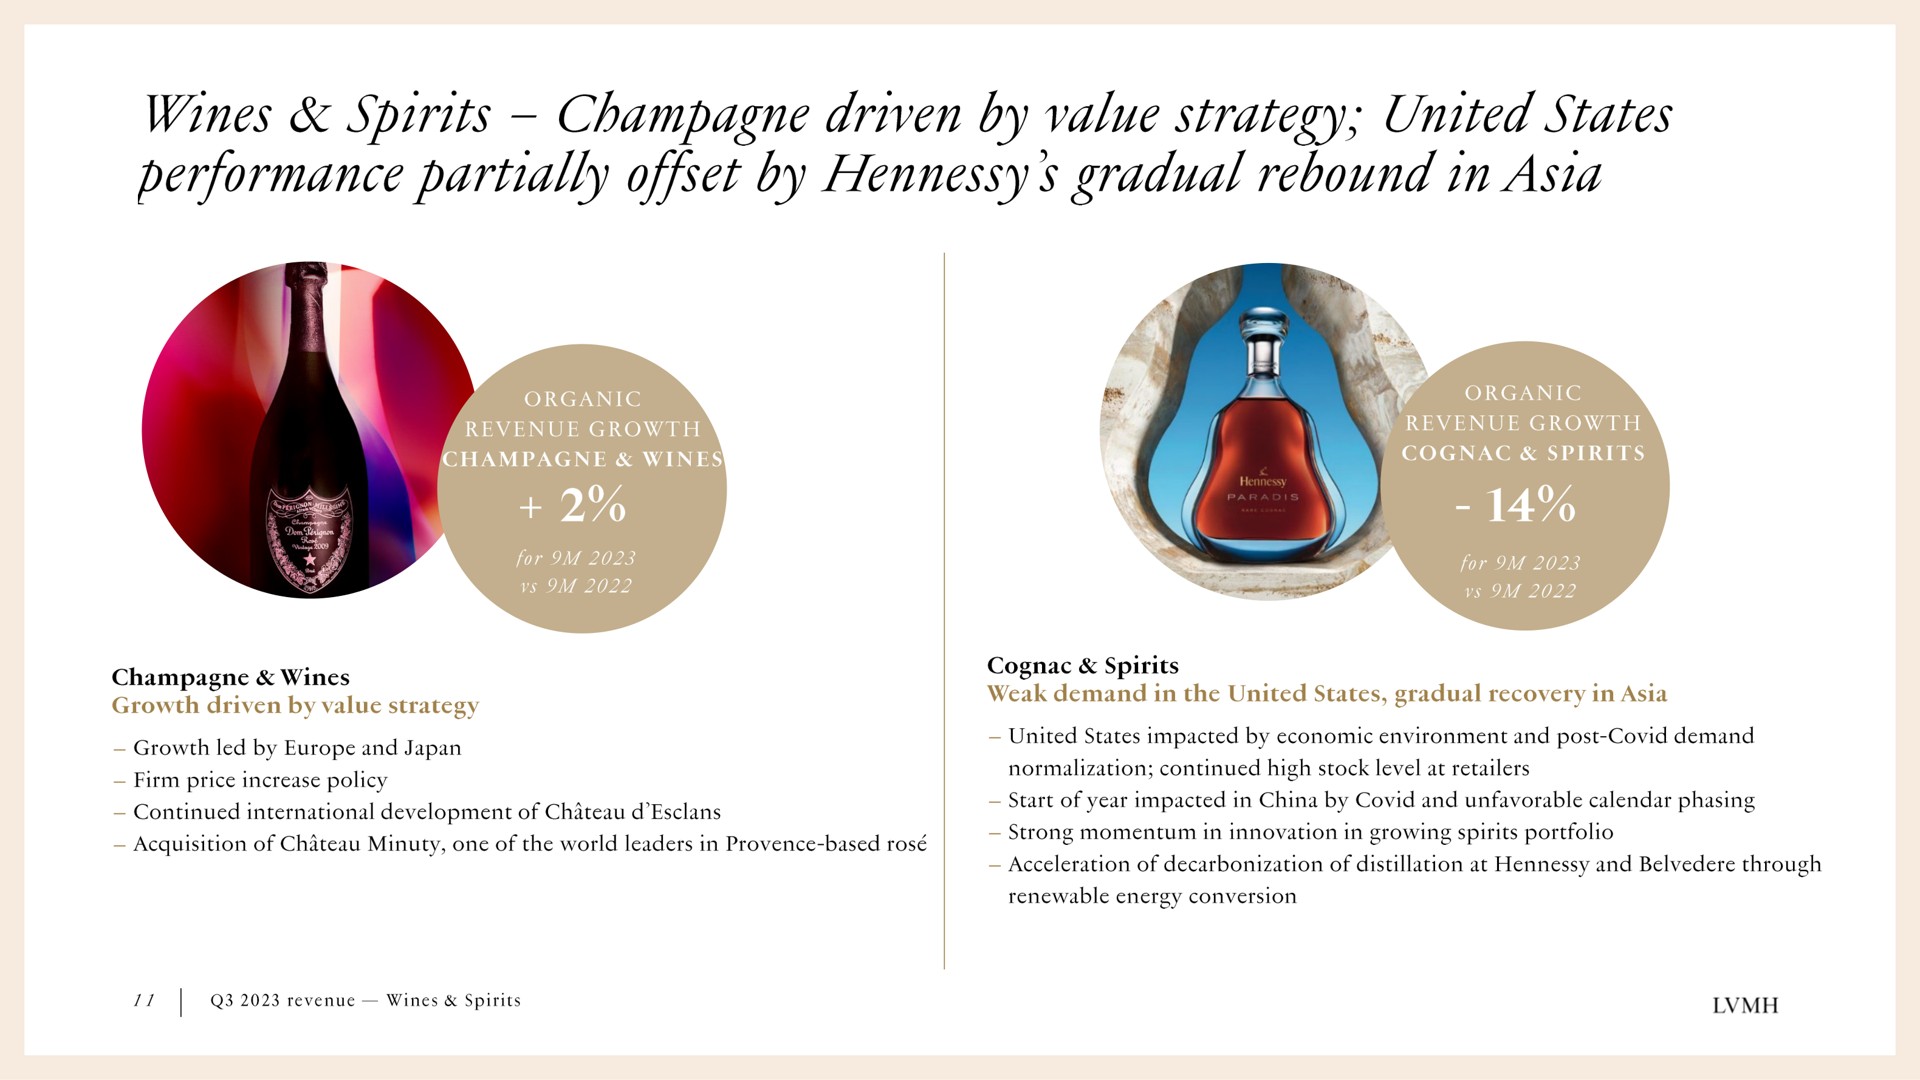 wines spirits champagne driven by value strategy united states performance partially offset by gradual rebound in | LVMH